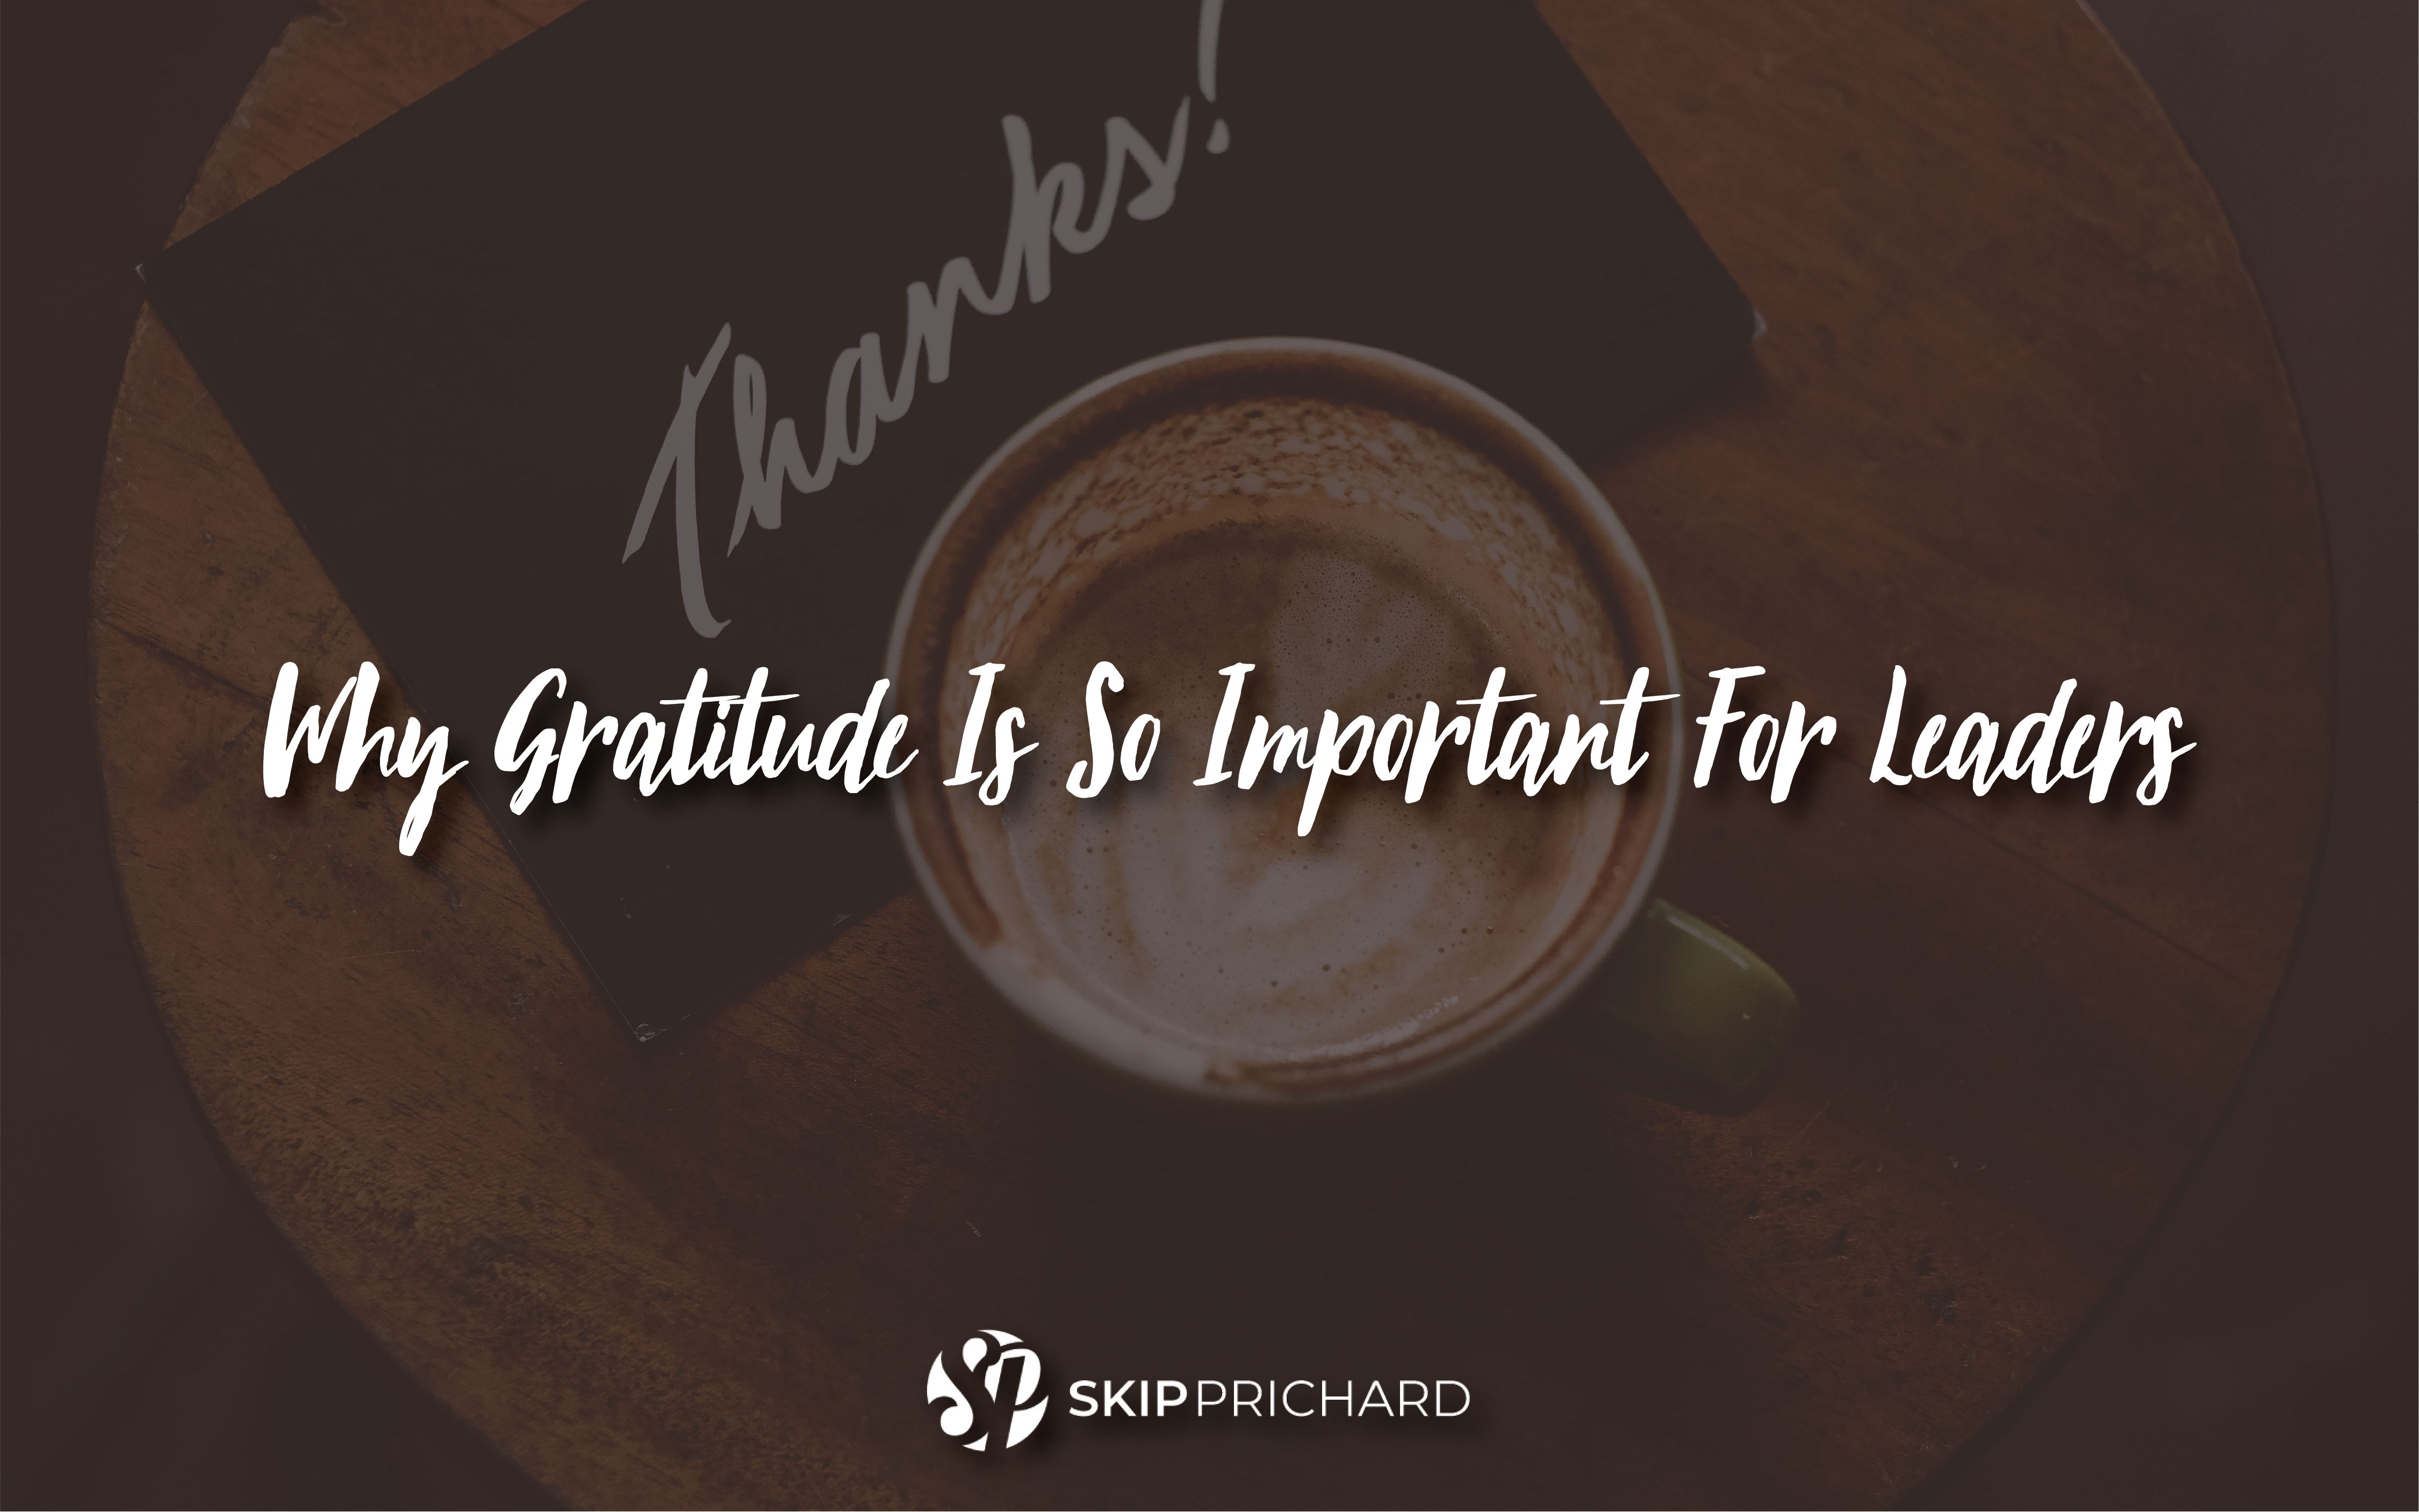 Aim Higher: Why gratitude is so important for leaders